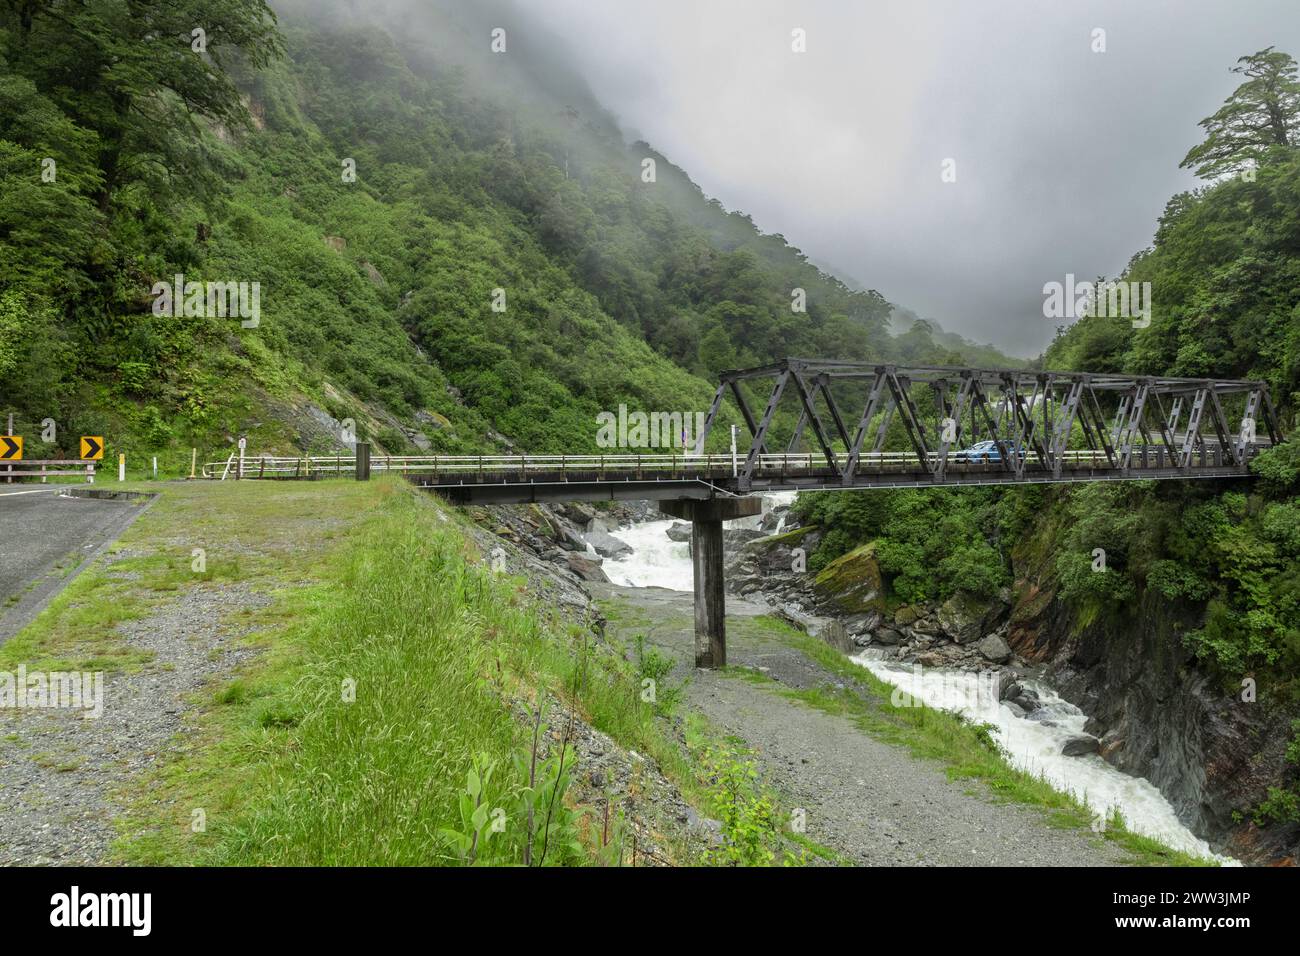 A bridge over the river Haast, near Gates of Haast, on State Highway 6 in the Otago region on the South Island of New Zealand. Stock Photo